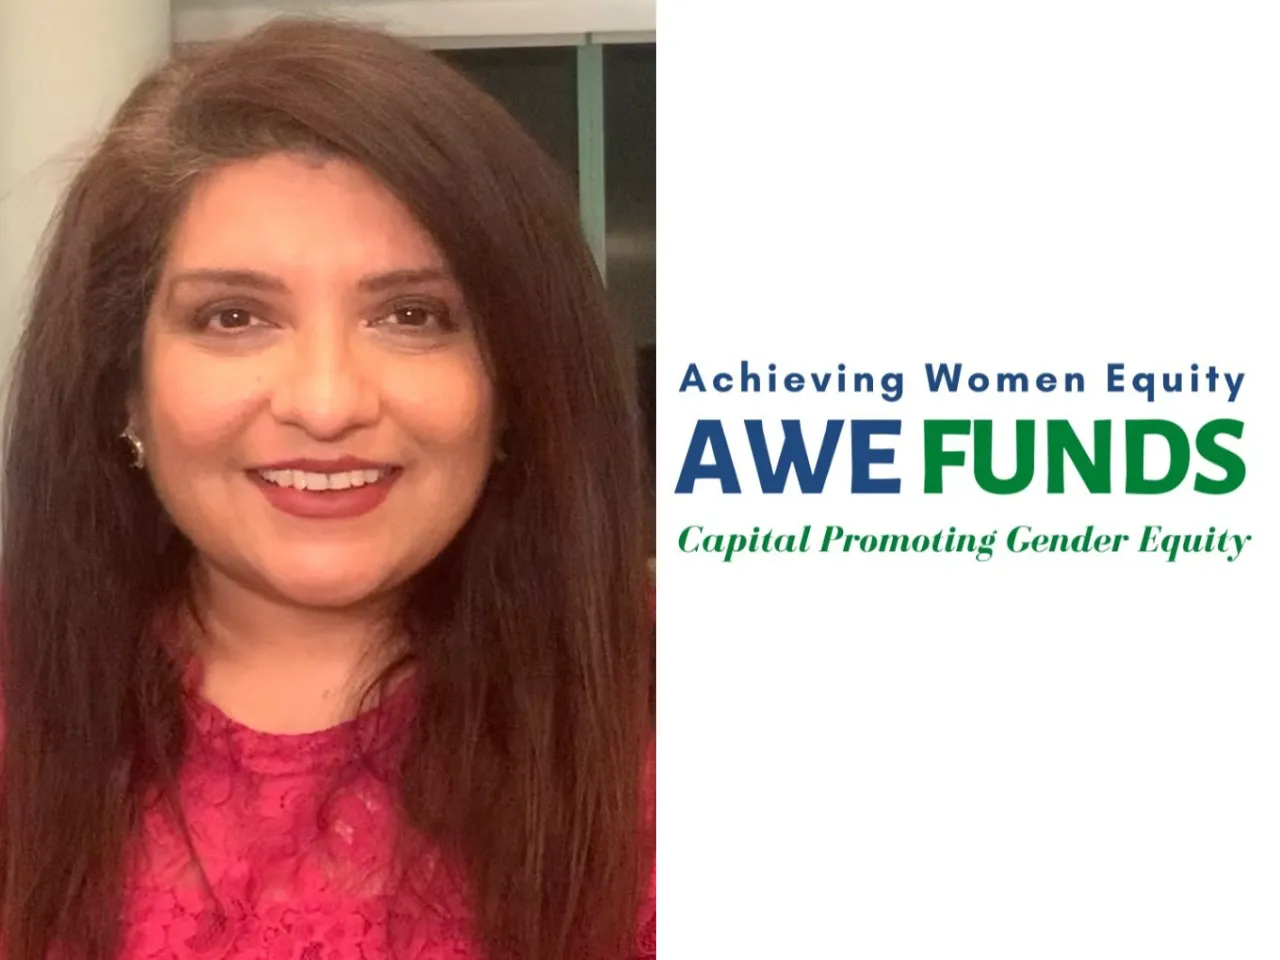 Gender equity focused investment firm AWE Funds announces first close of maiden fund at $15M